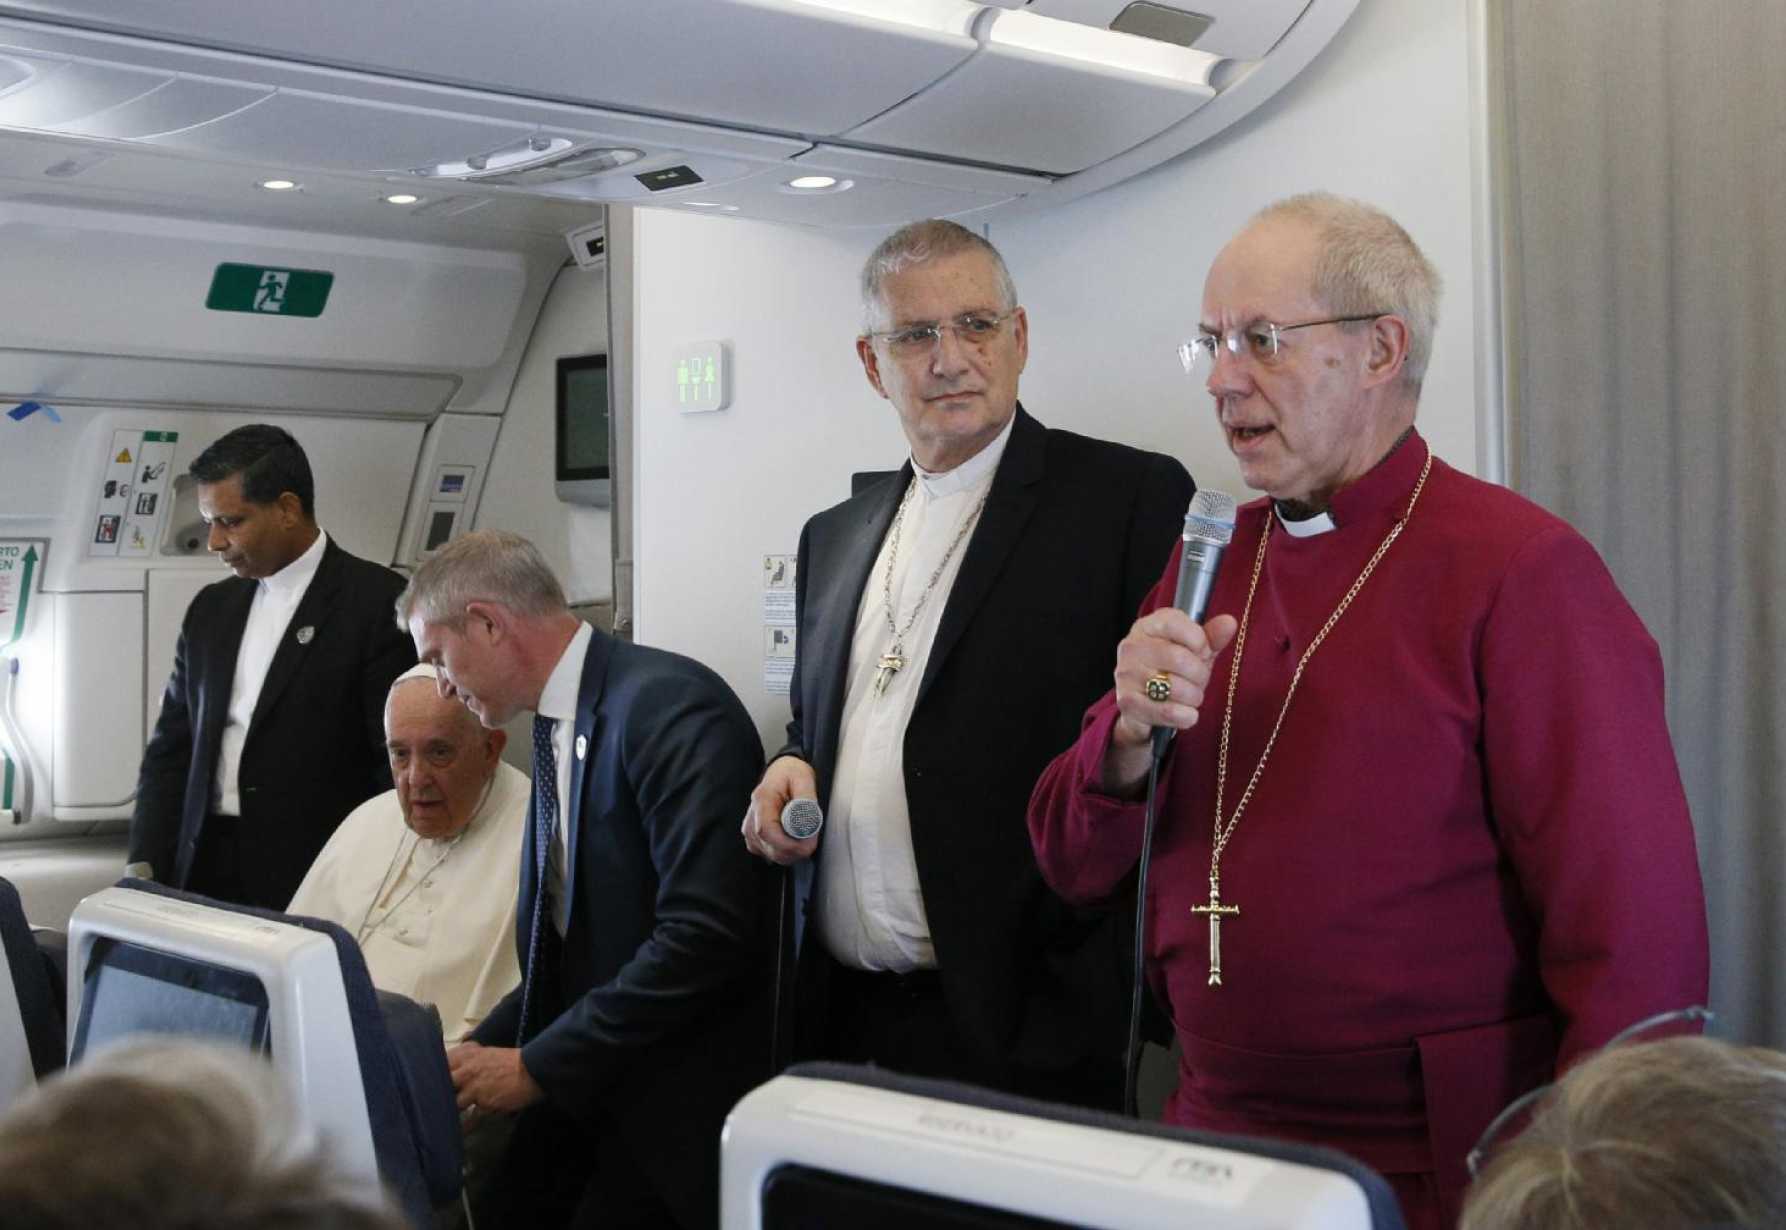 Arms trade is a 'plague,' pope says on flight back from Africa